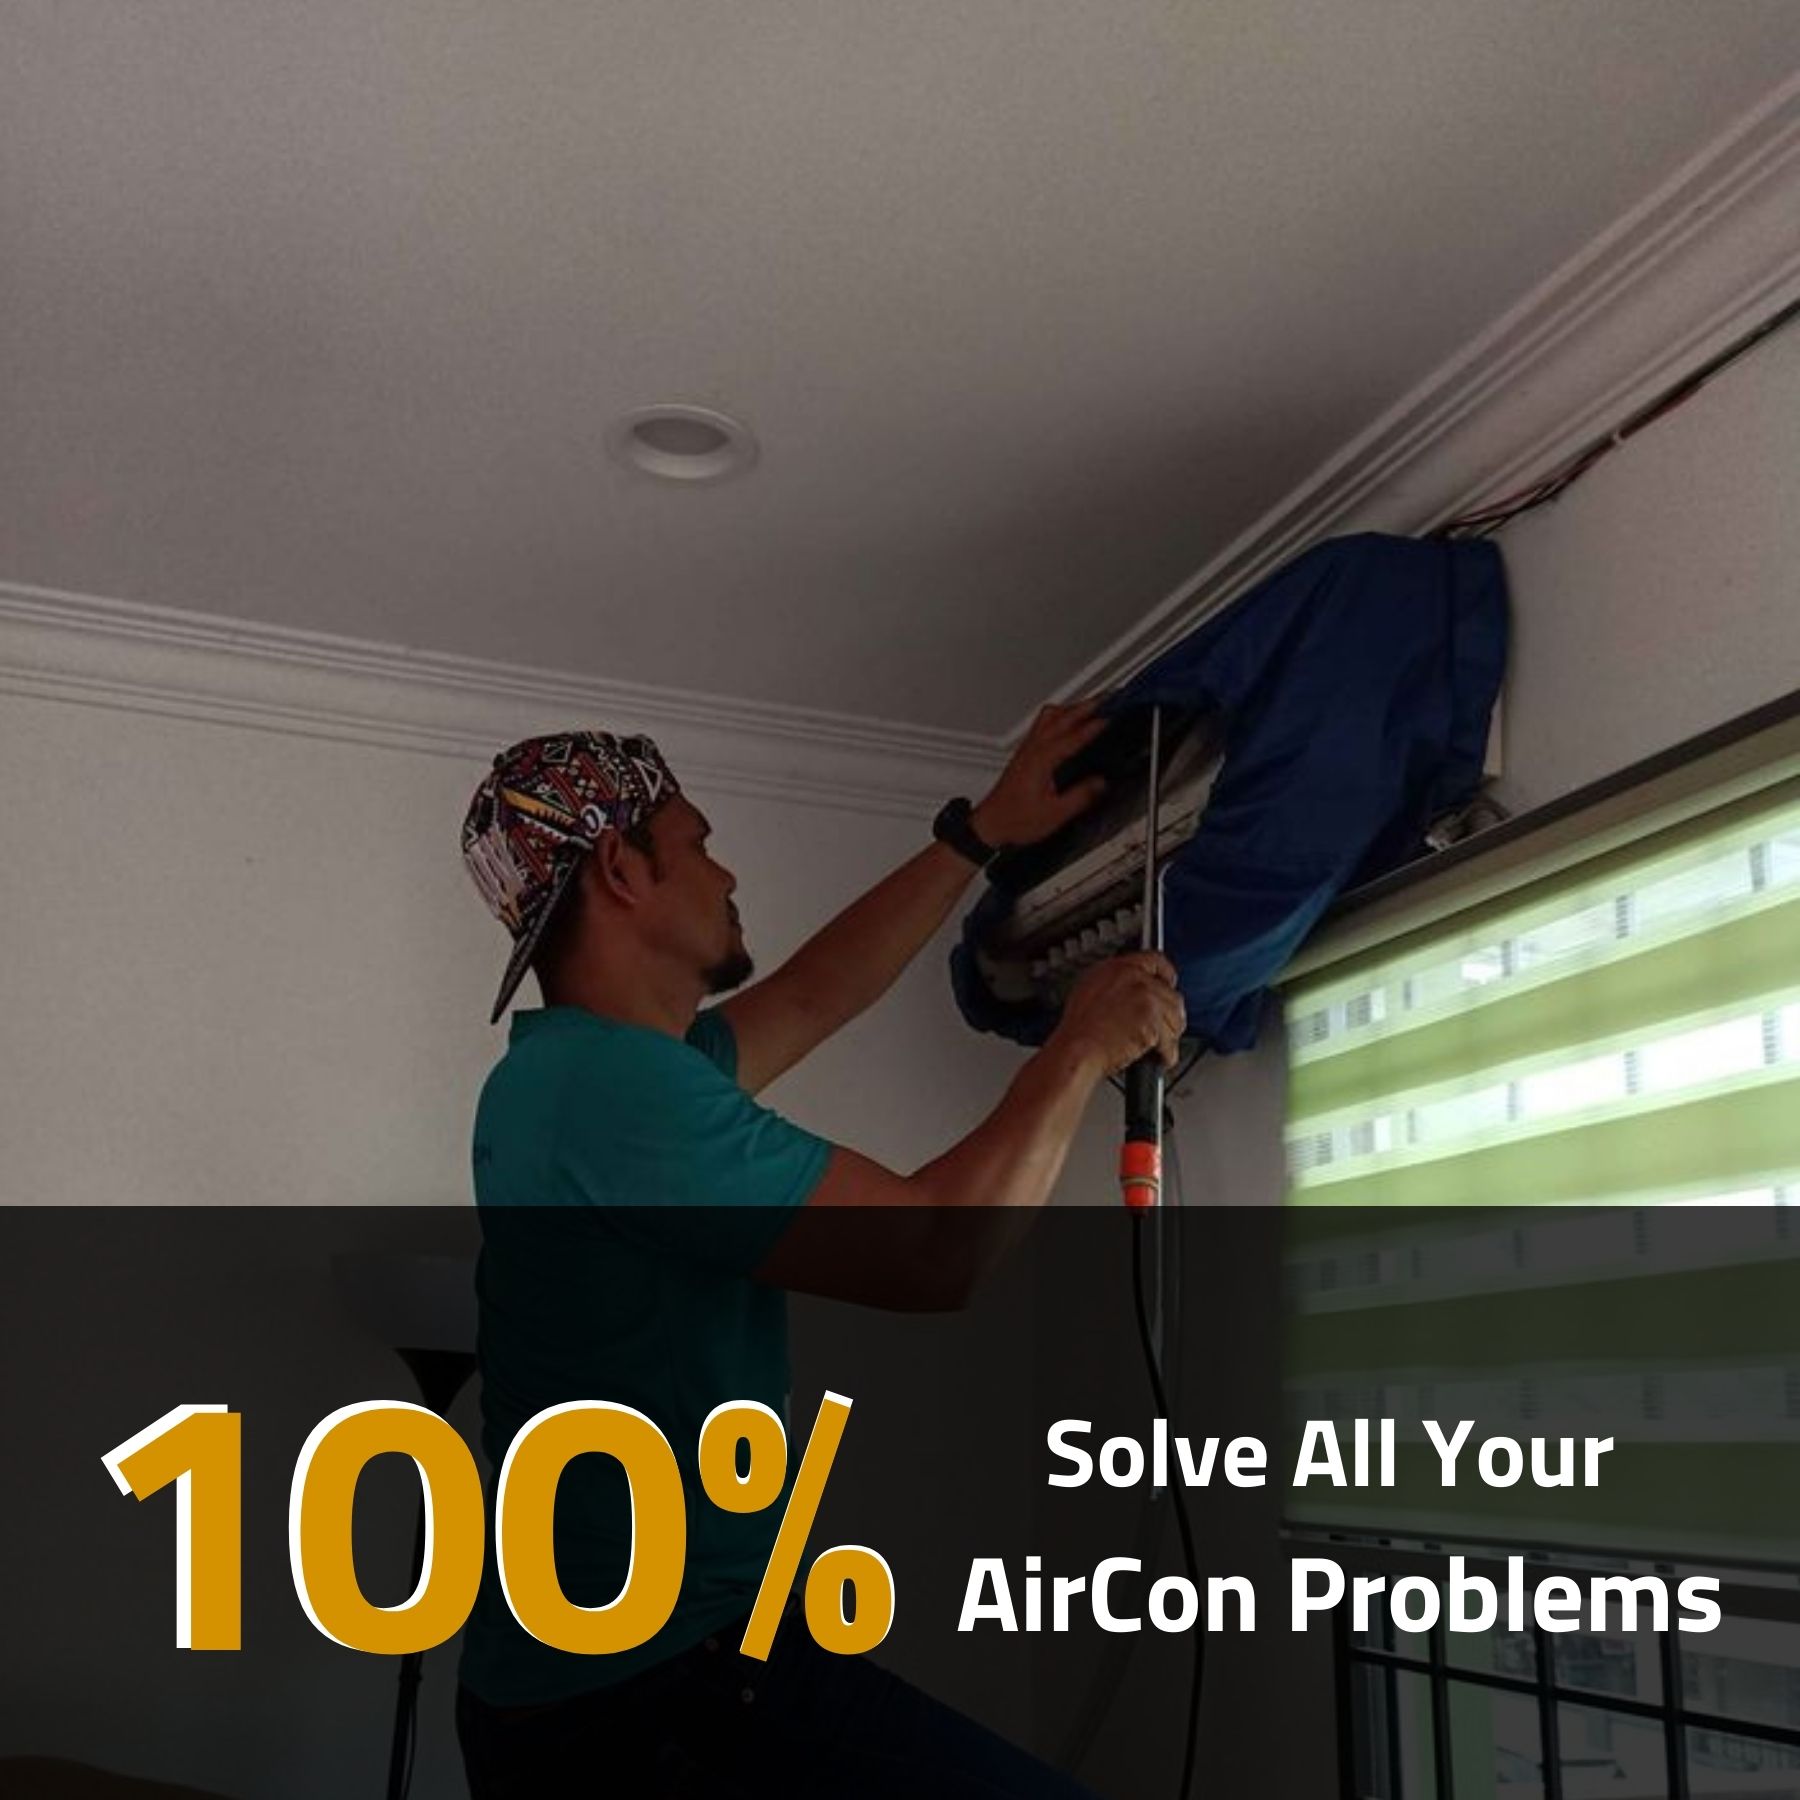 solve all aircon problems